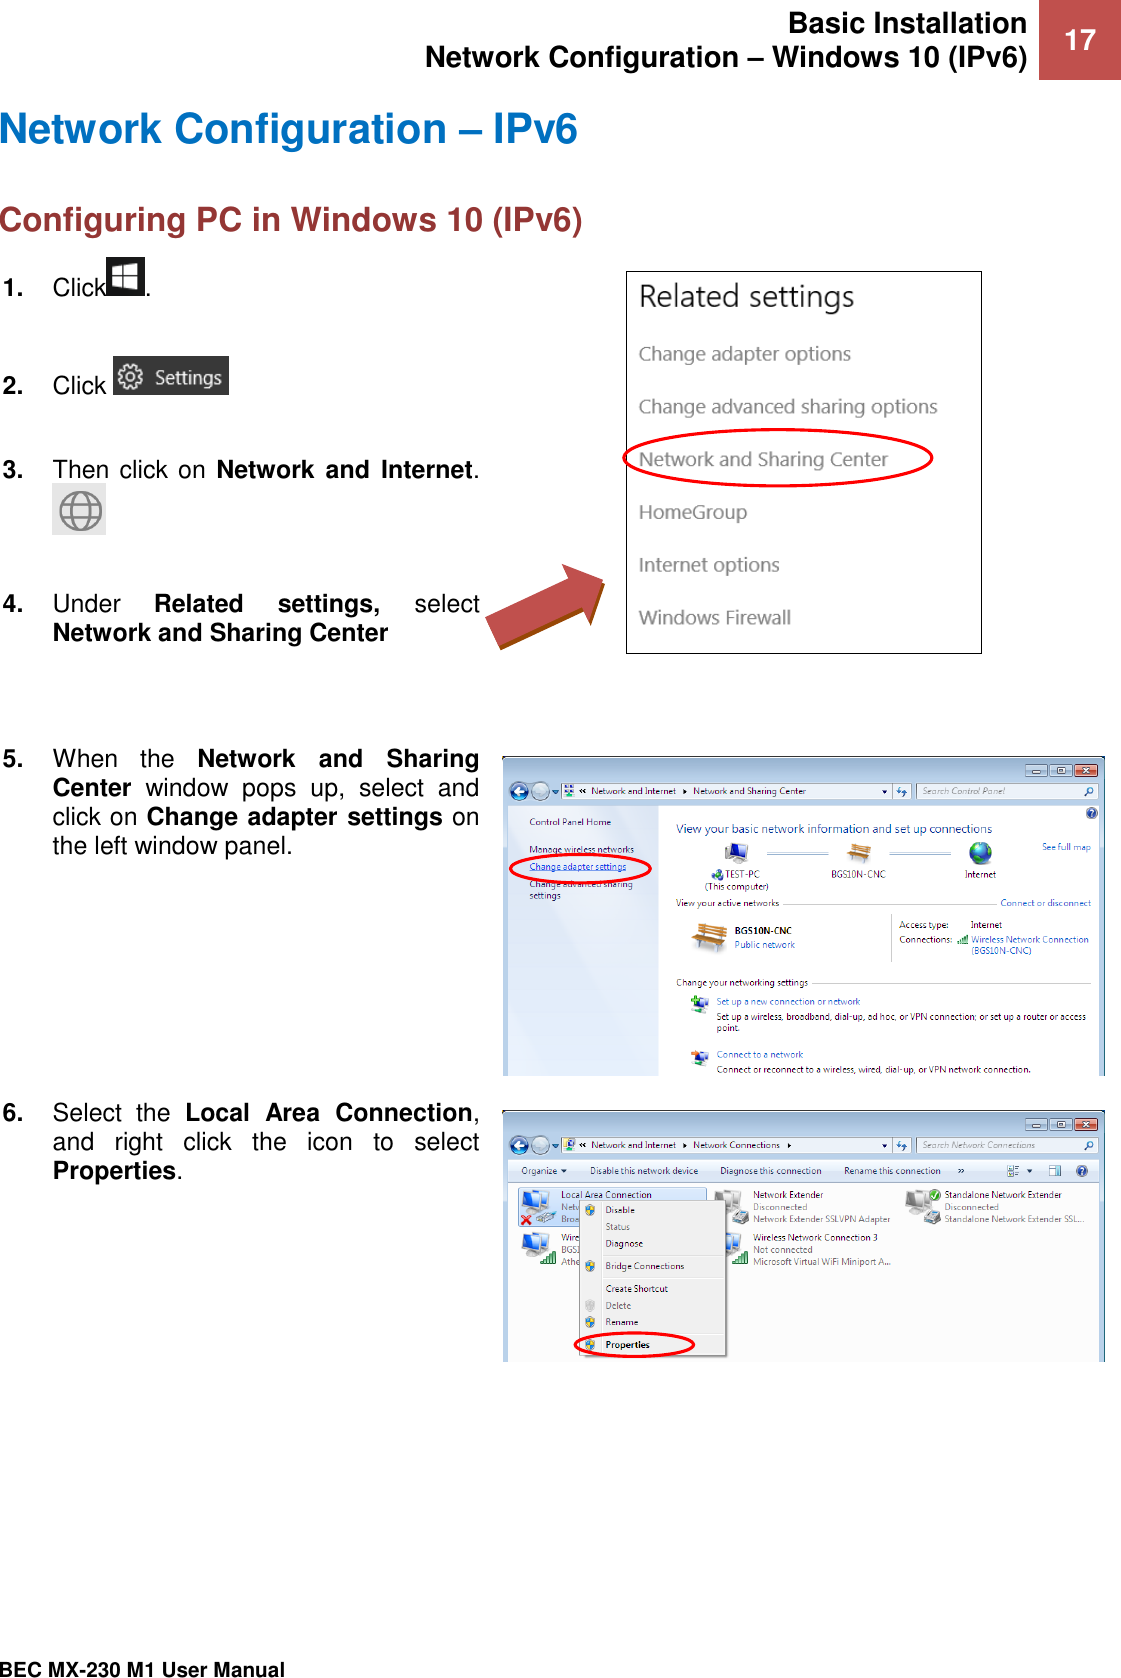 Basic Installation Network Configuration – Windows 10 (IPv6) 17   BEC MX-230 M1 User Manual  Network Configuration – IPv6 Configuring PC in Windows 10 (IPv6)  1. Click .  2. Click    3. Then click on Network  and  Internet.   4. Under  Related  settings,  select Network and Sharing Center    5. When  the  Network  and  Sharing Center  window  pops  up,  select  and click on Change adapter settings on the left window panel.  6. Select  the  Local  Area  Connection, and  right  click  the  icon  to  select Properties.  